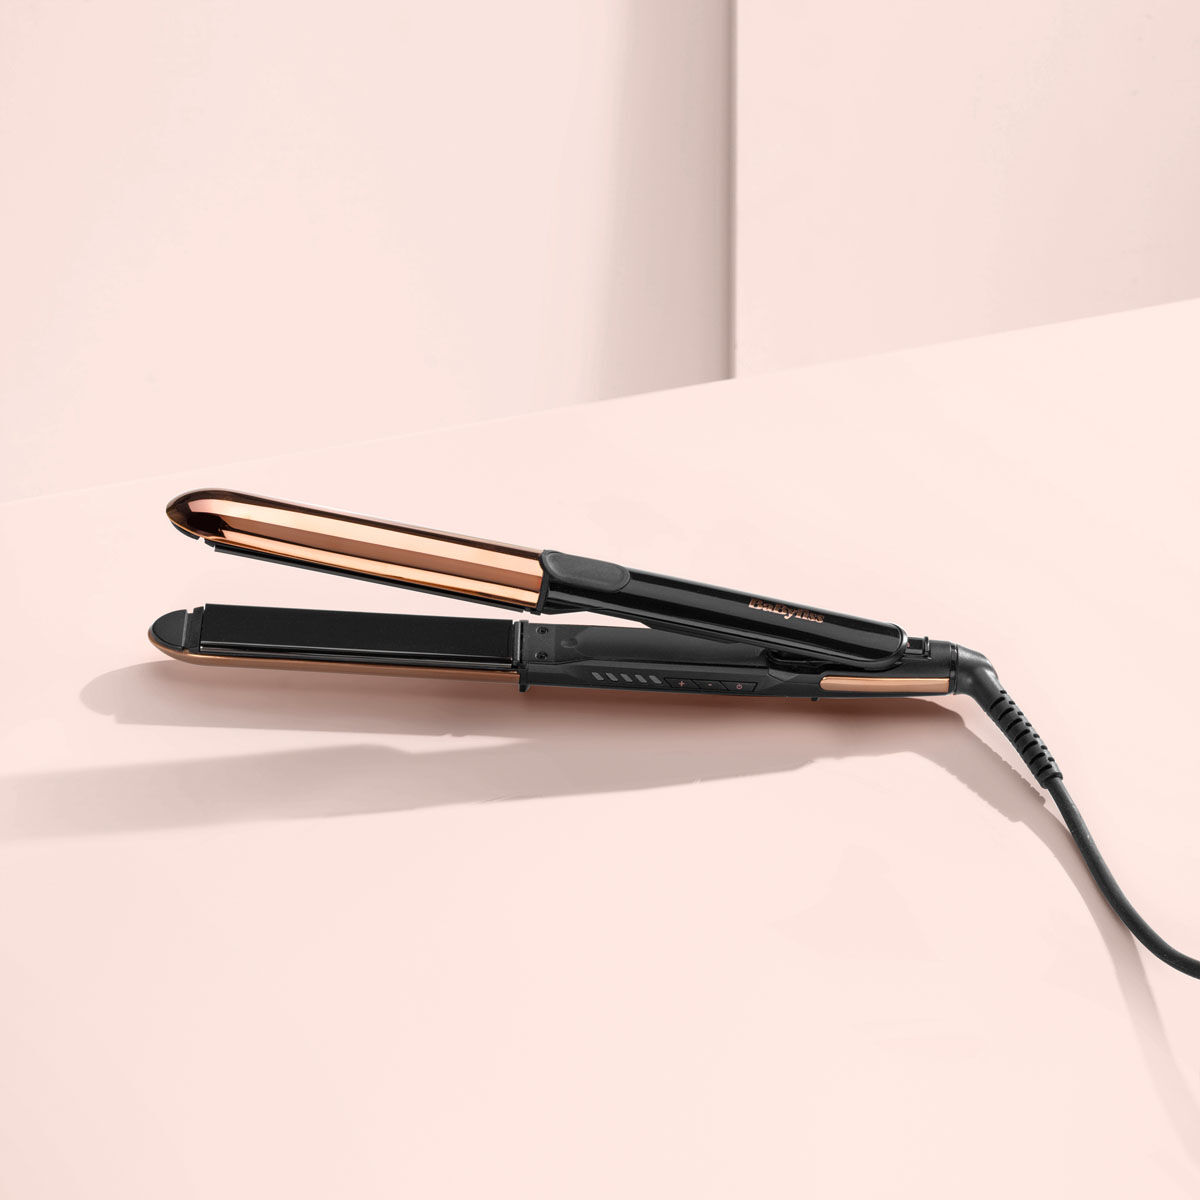 The Best Flat Iron For Curling Hair Our Top 5 Picks